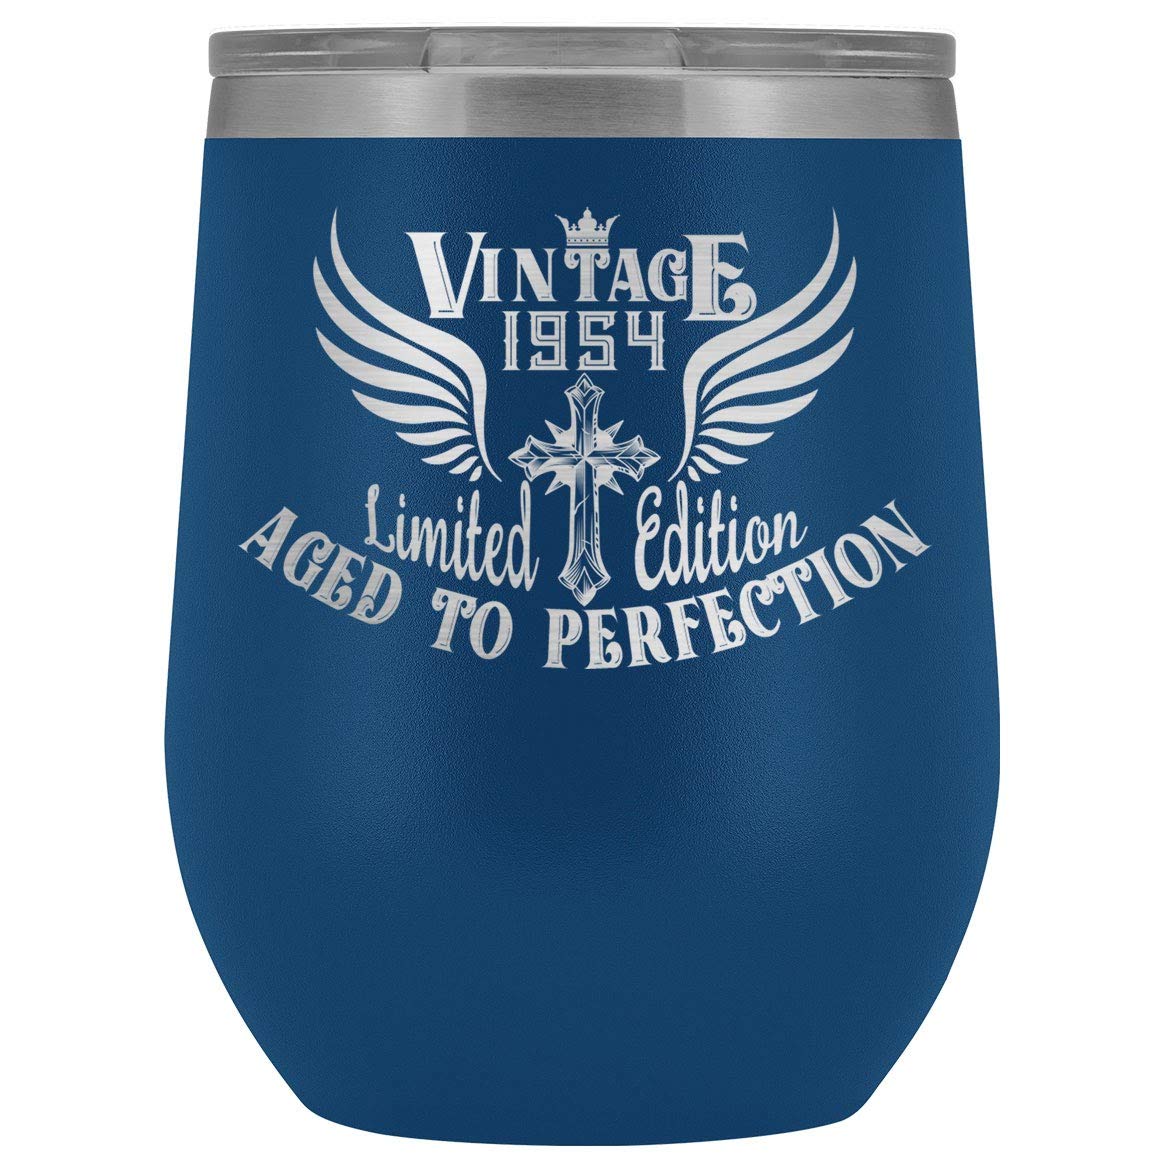 PAW8888 1954 70th Birthday Wine Tumbler Gift for Him Her, Gifts for Men, Women, Cross Vintage 1954 Aged To Perfection. Double Wall Stainless Steel Stemless Insulated Wine Glass - Blue